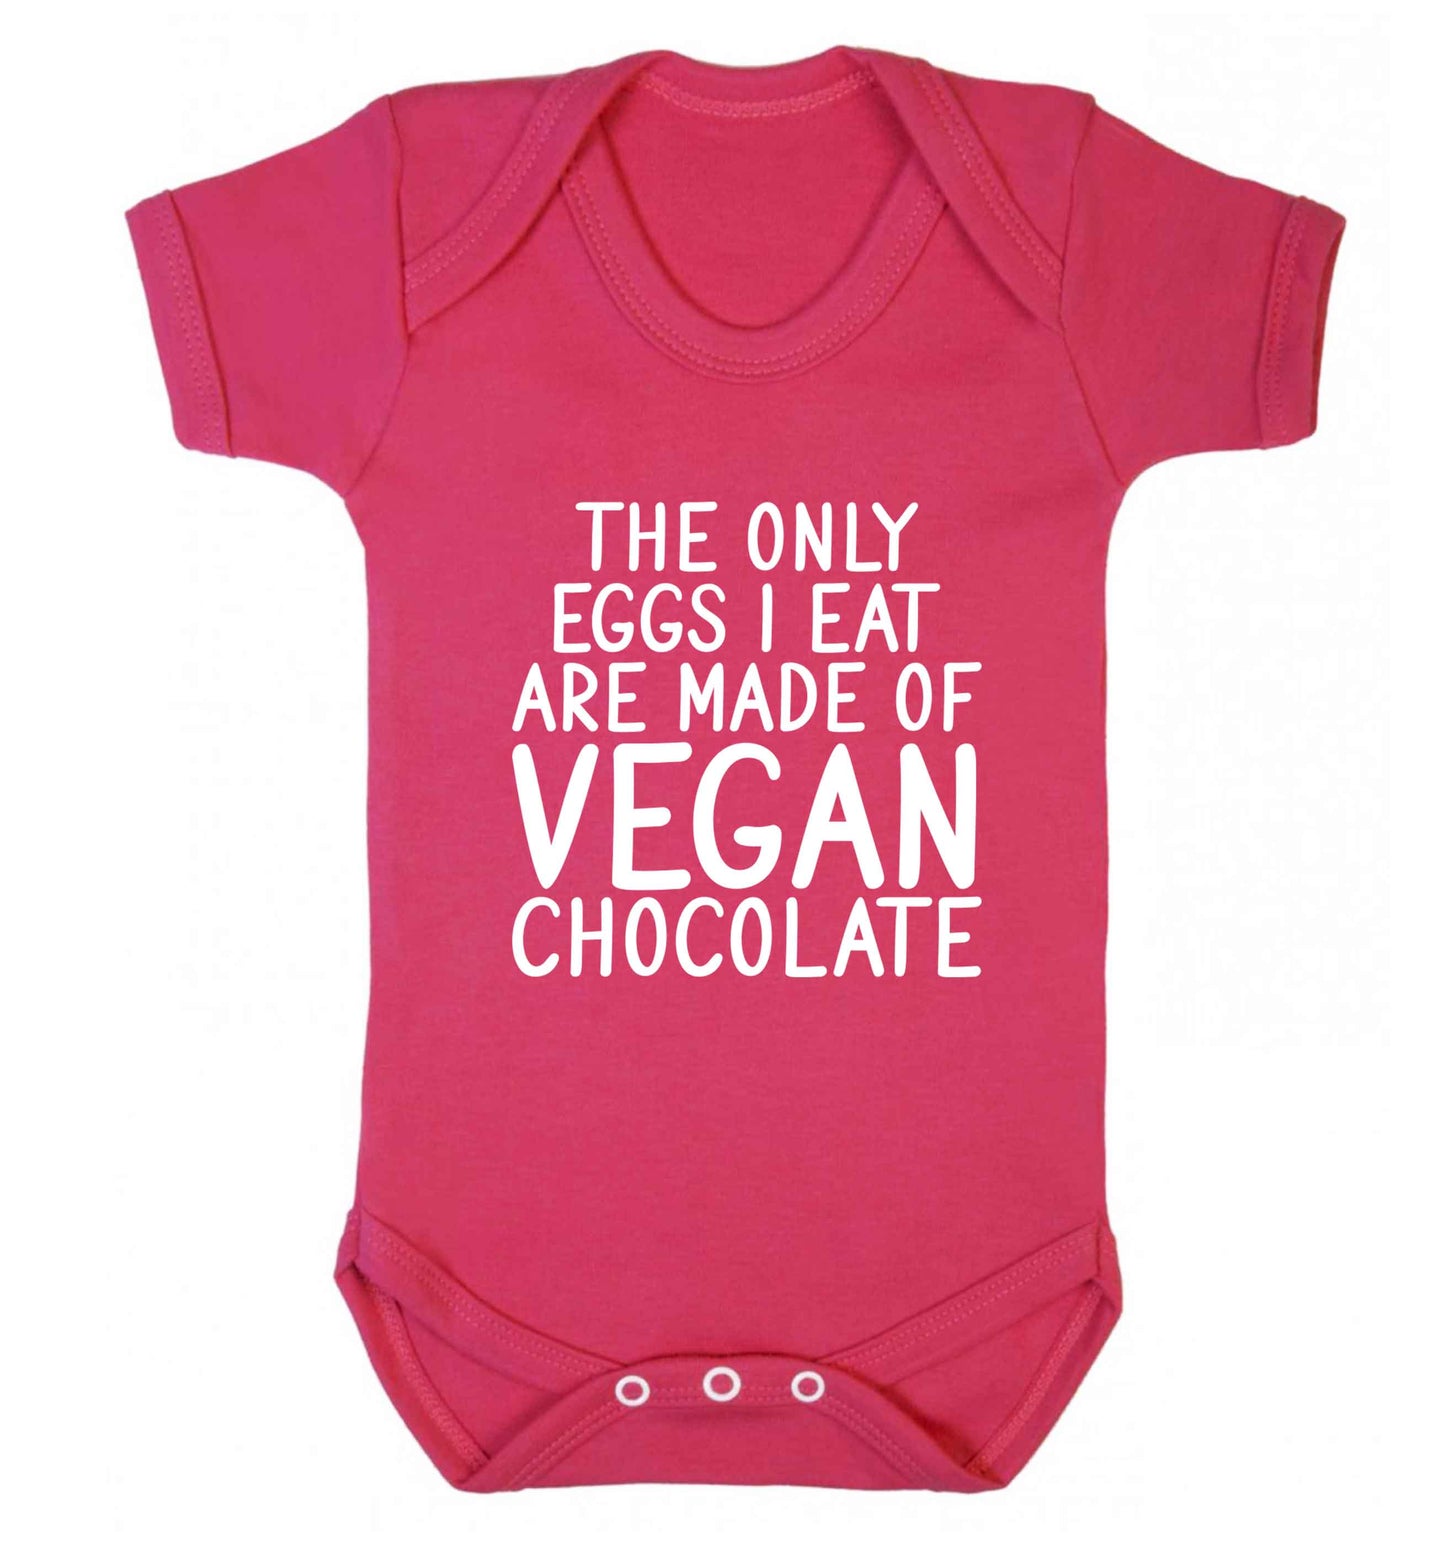 The only eggs I eat are made of vegan chocolate baby vest dark pink 18-24 months